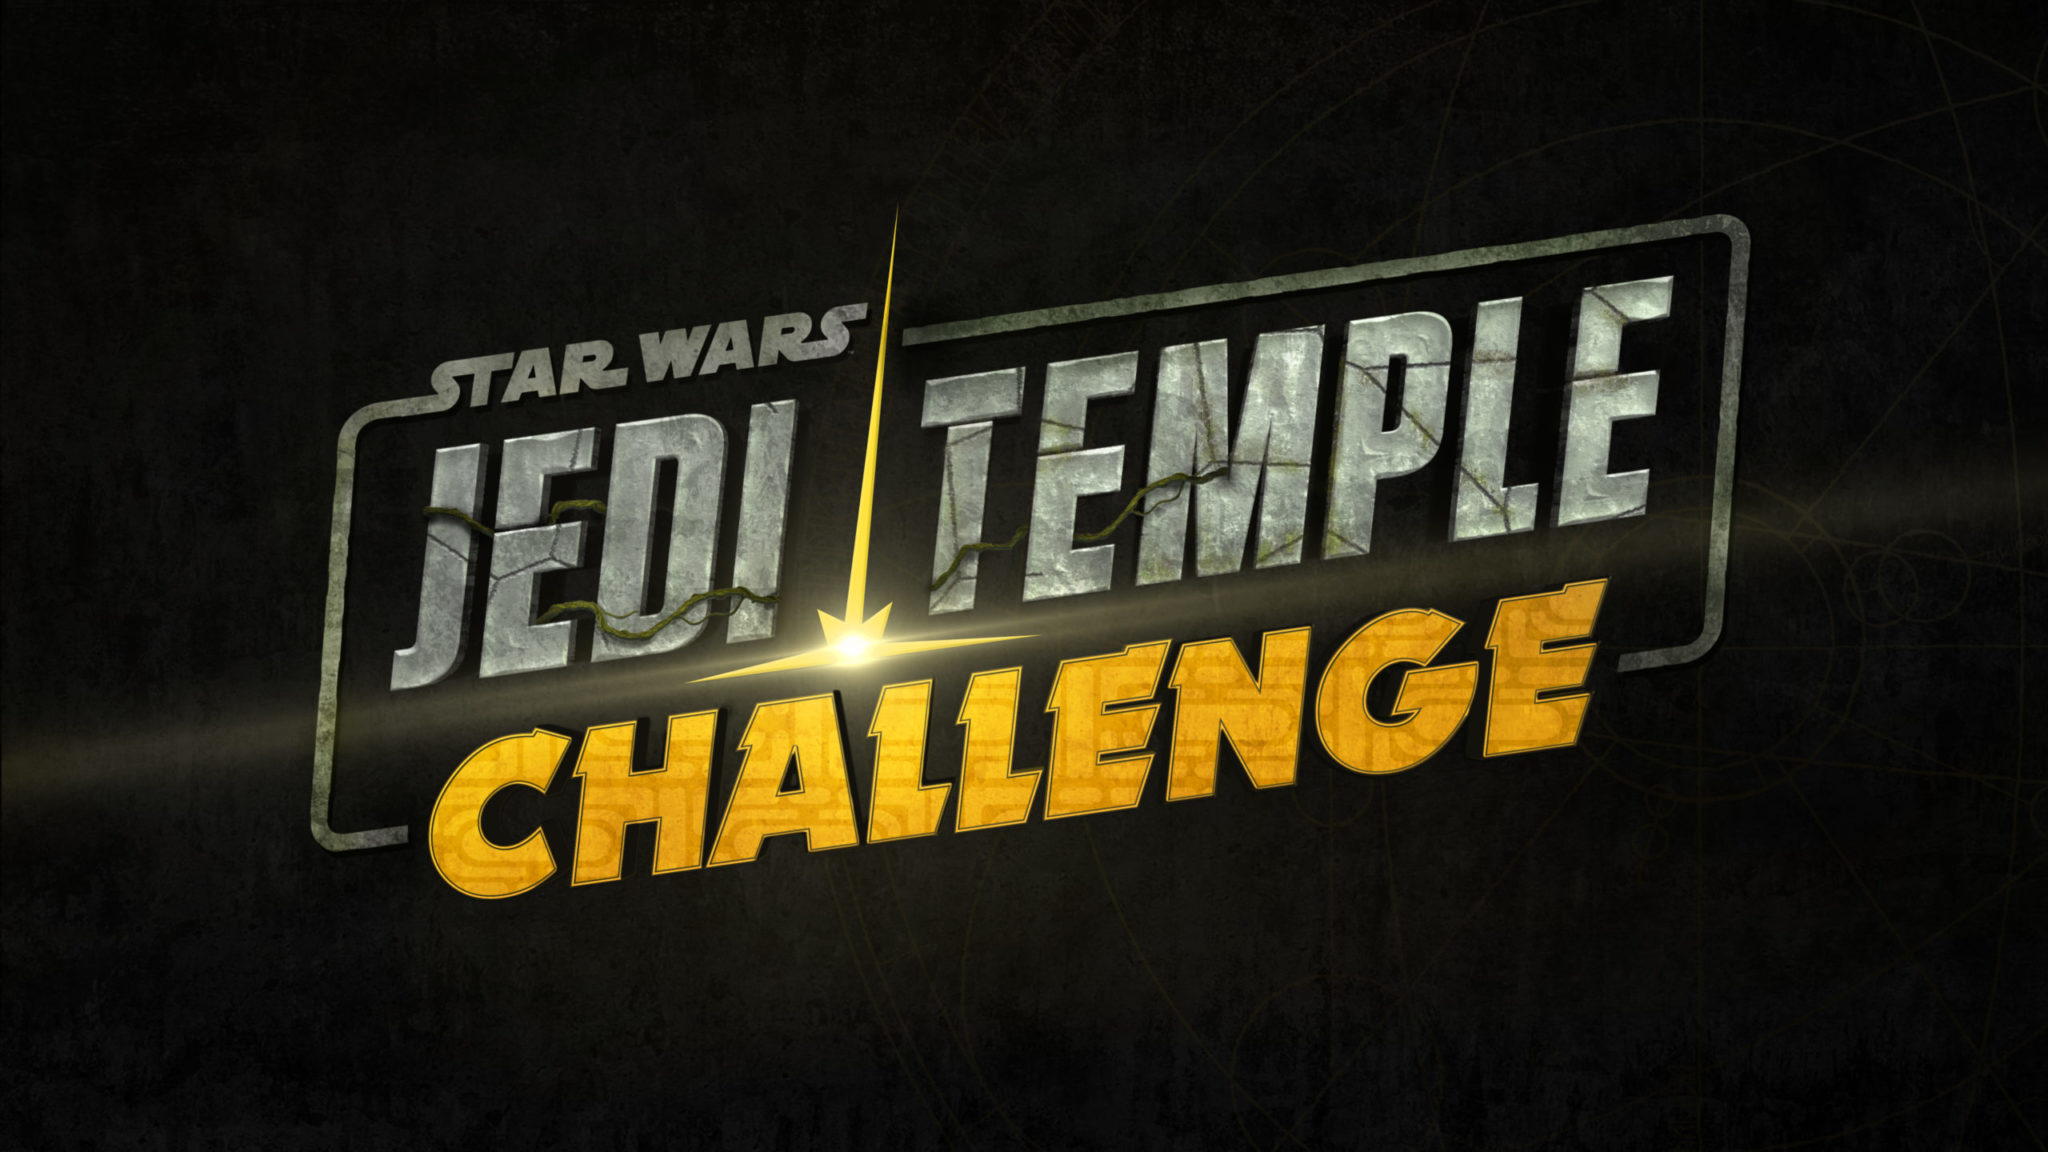 The New Star Wars Game Show ‘Jedi Temple Challenge’ Will Be a Disney+ Exclusive